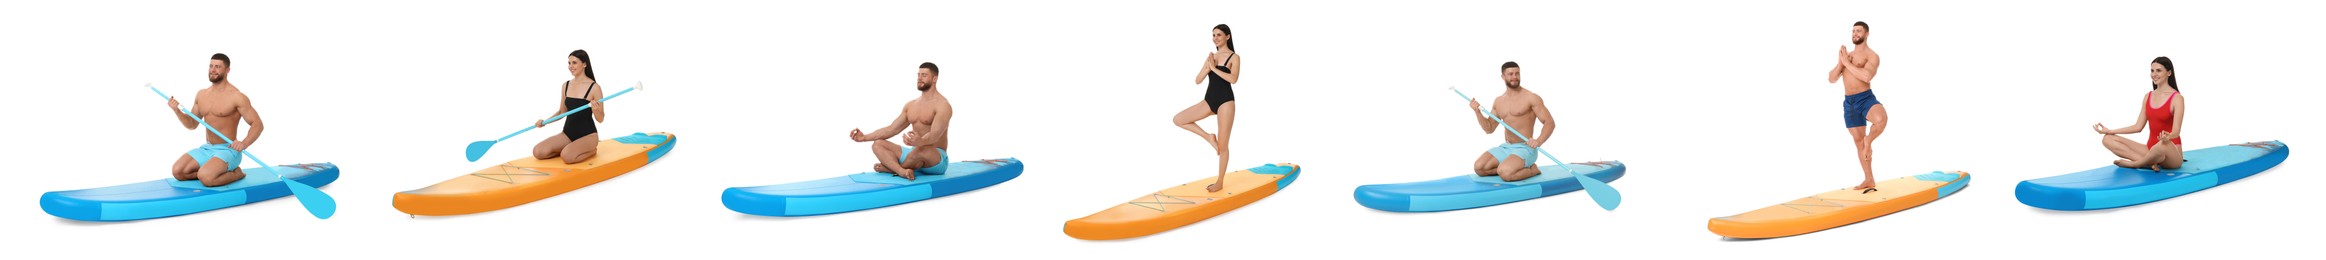 Collage with photos of young man and woman practicing yoga on sup boards isolated on white